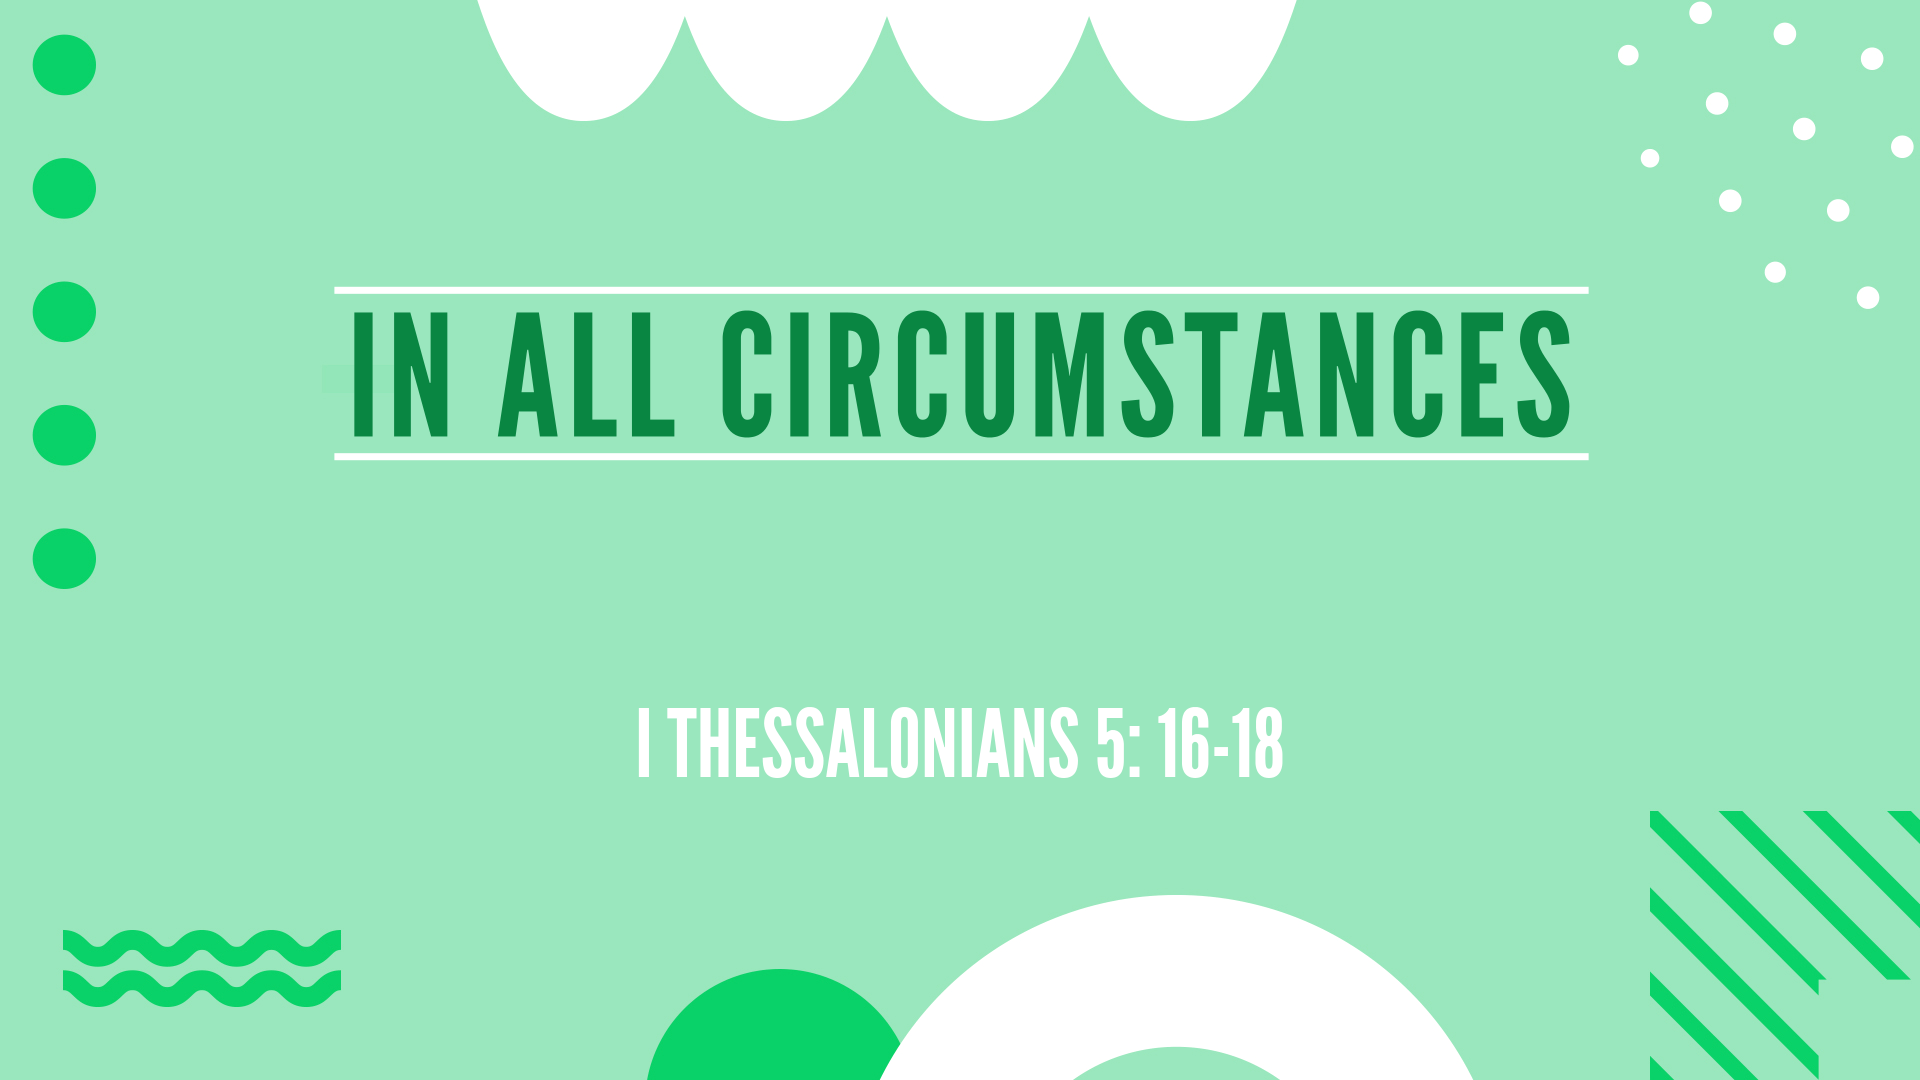 Oct 09, 2022 - In All Circumstances (Video) - I Thessalonians 5: 16-18